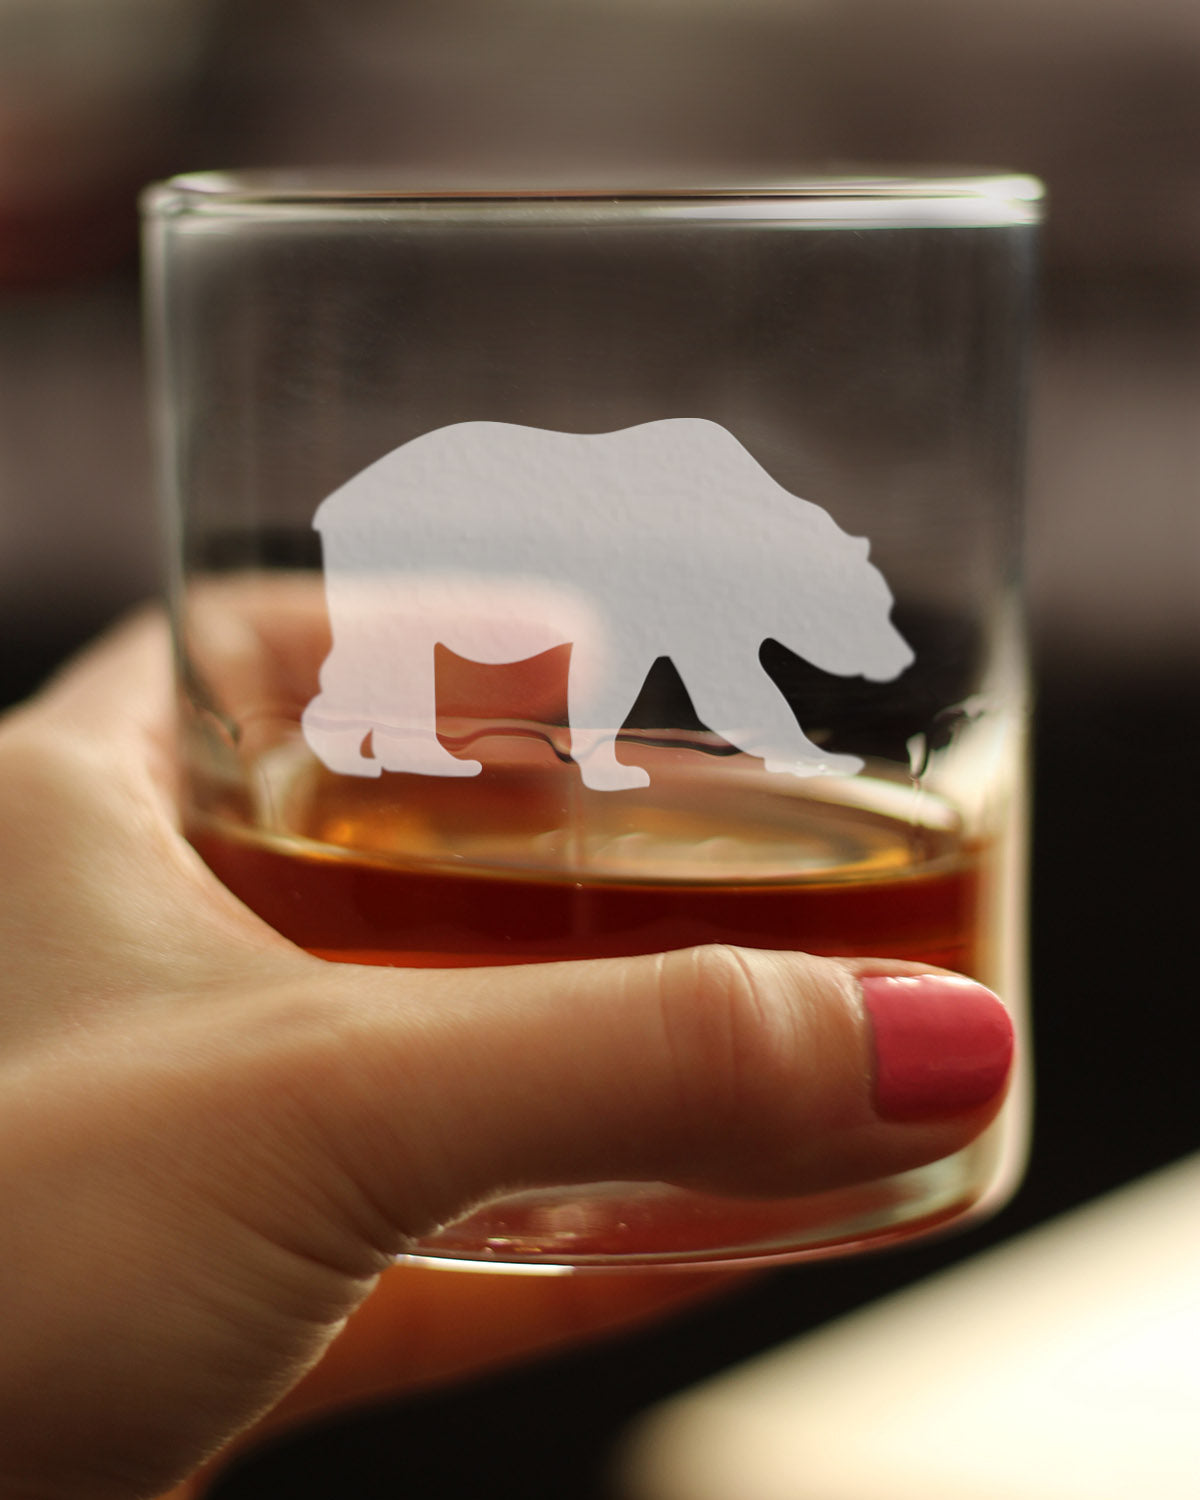 Bear Whiskey Rocks Glass - Cabin Themed Gifts or Rustic Decor for Men and Women - Fun Whisky Drinking Tumbler - 10.25 oz